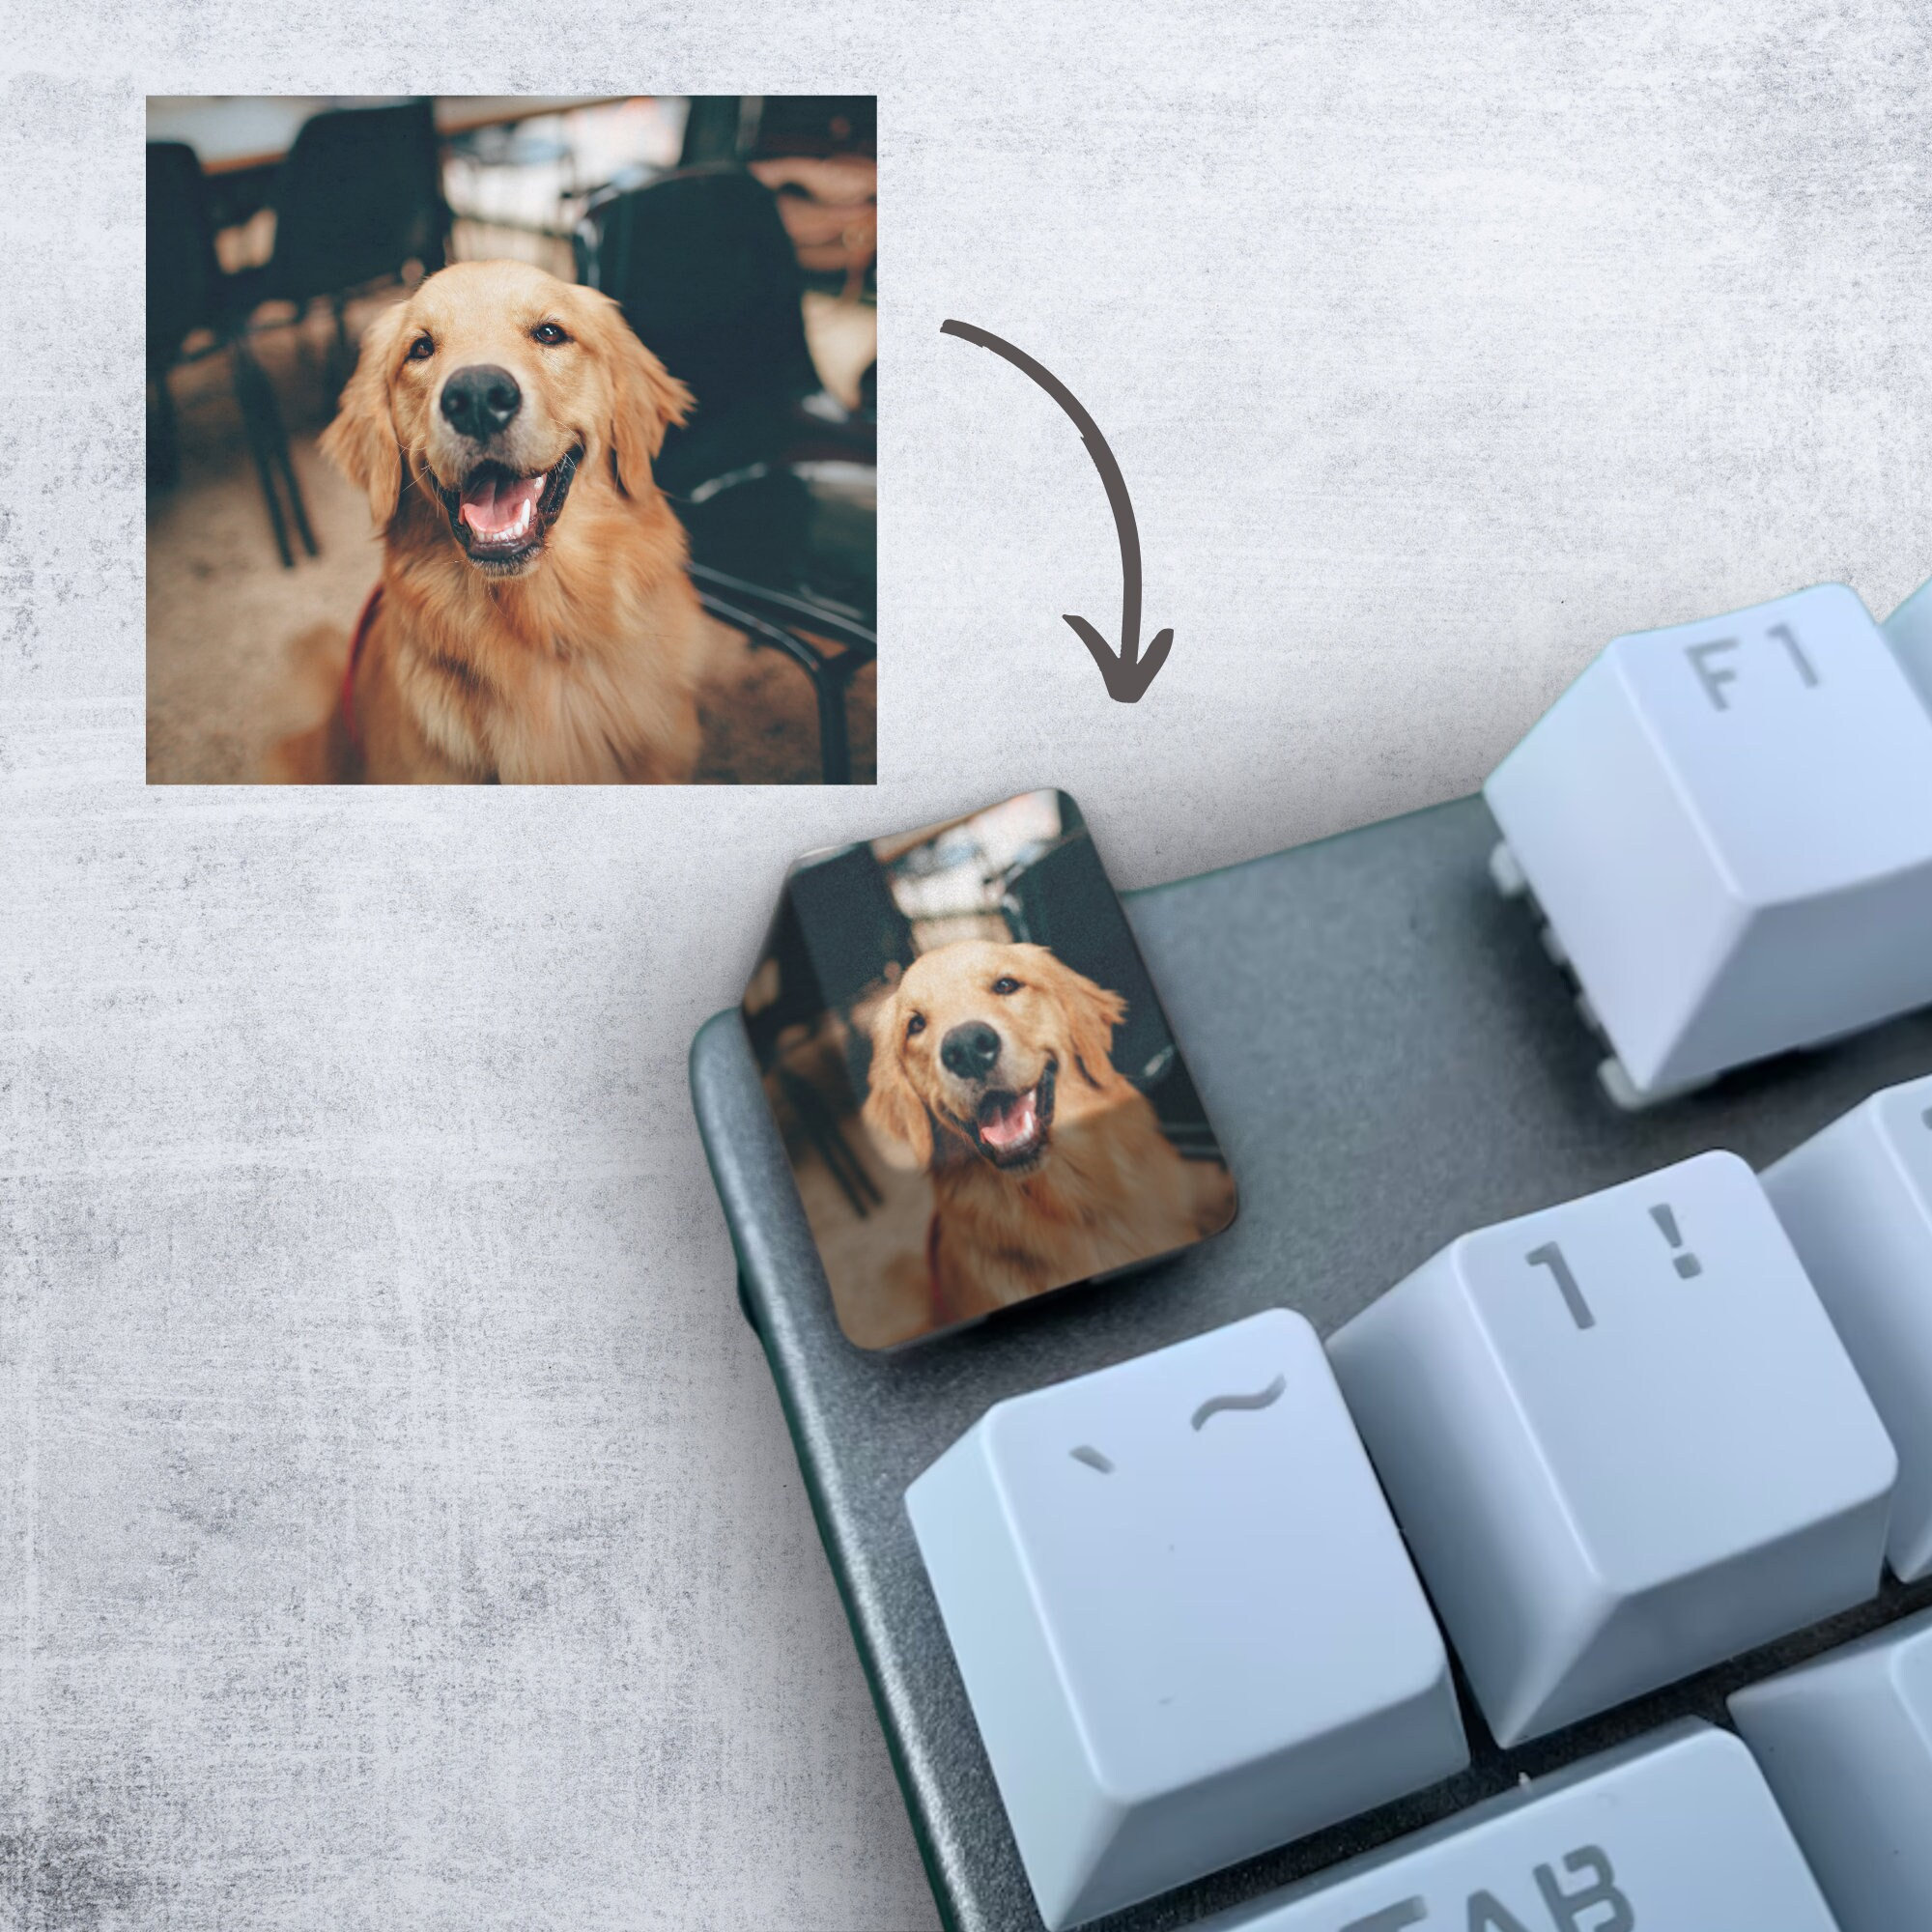 Custom Photo Keycap, Personalized Keycap, 3D Printed Keycap, Keycap for MX Cherry Switches Keyboard, Handmade Gift